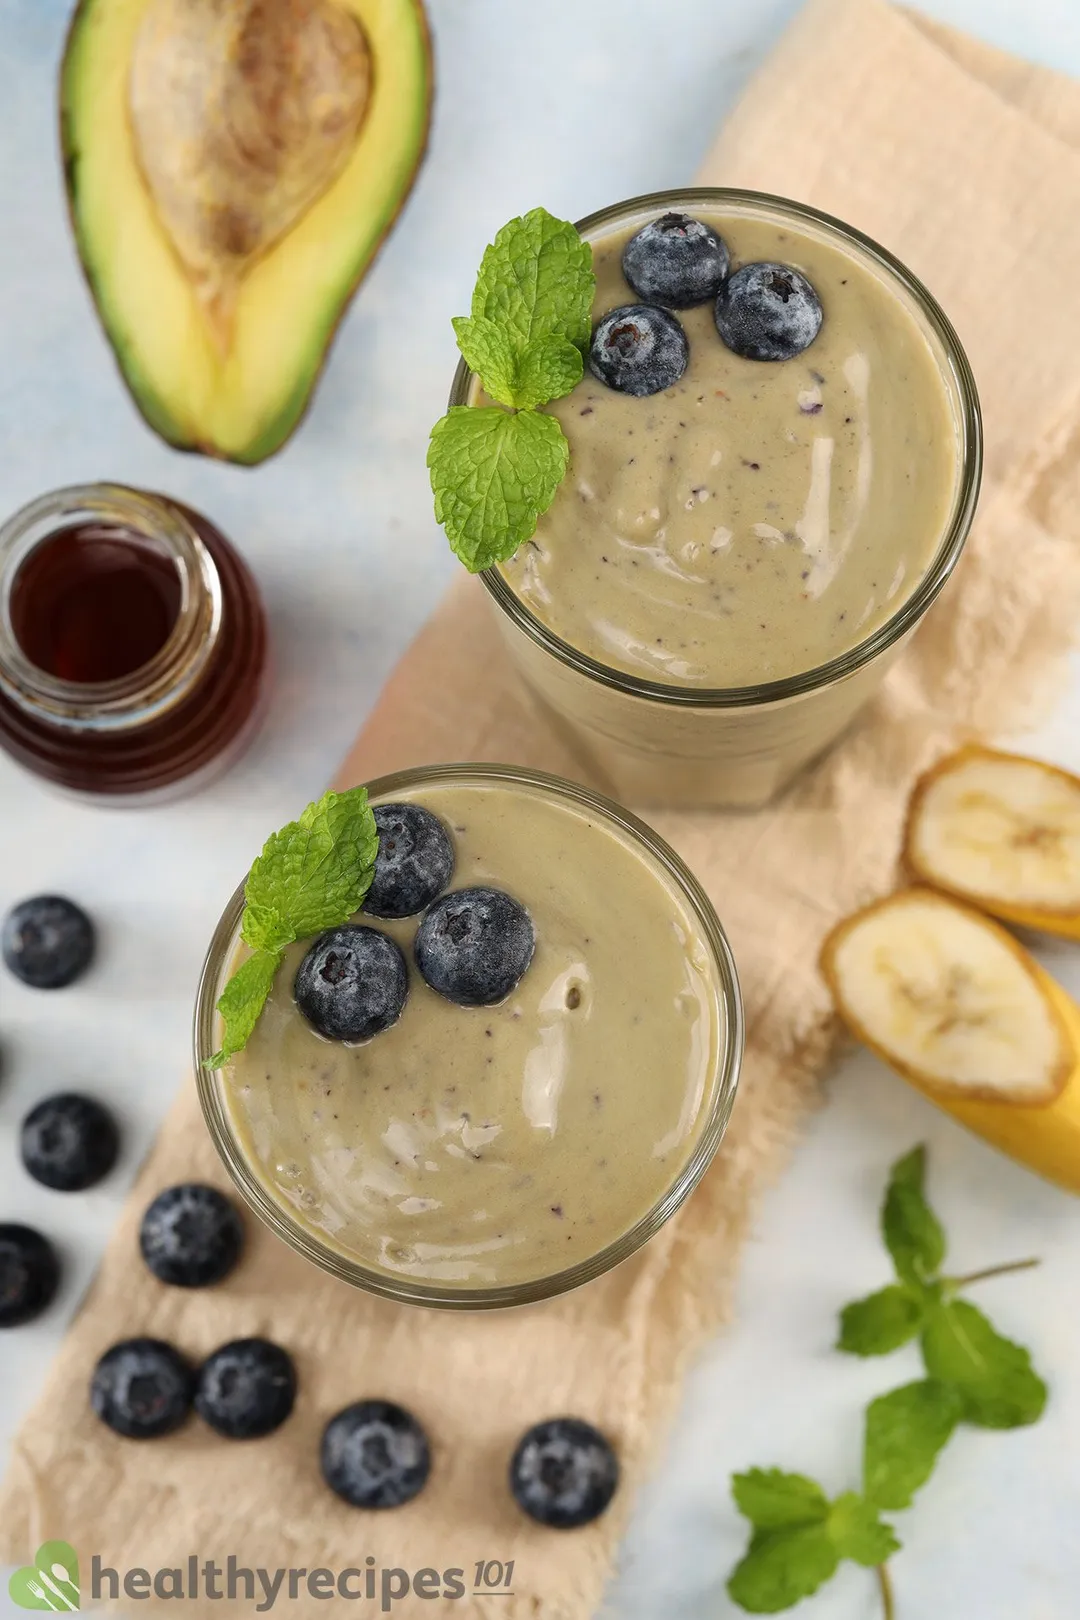 A high-angle shot of two glasses of avocado blueberry smoothie, surrounded by half an avocado, blueberries, sliced bananas, mint leaves, and a jar of honey.